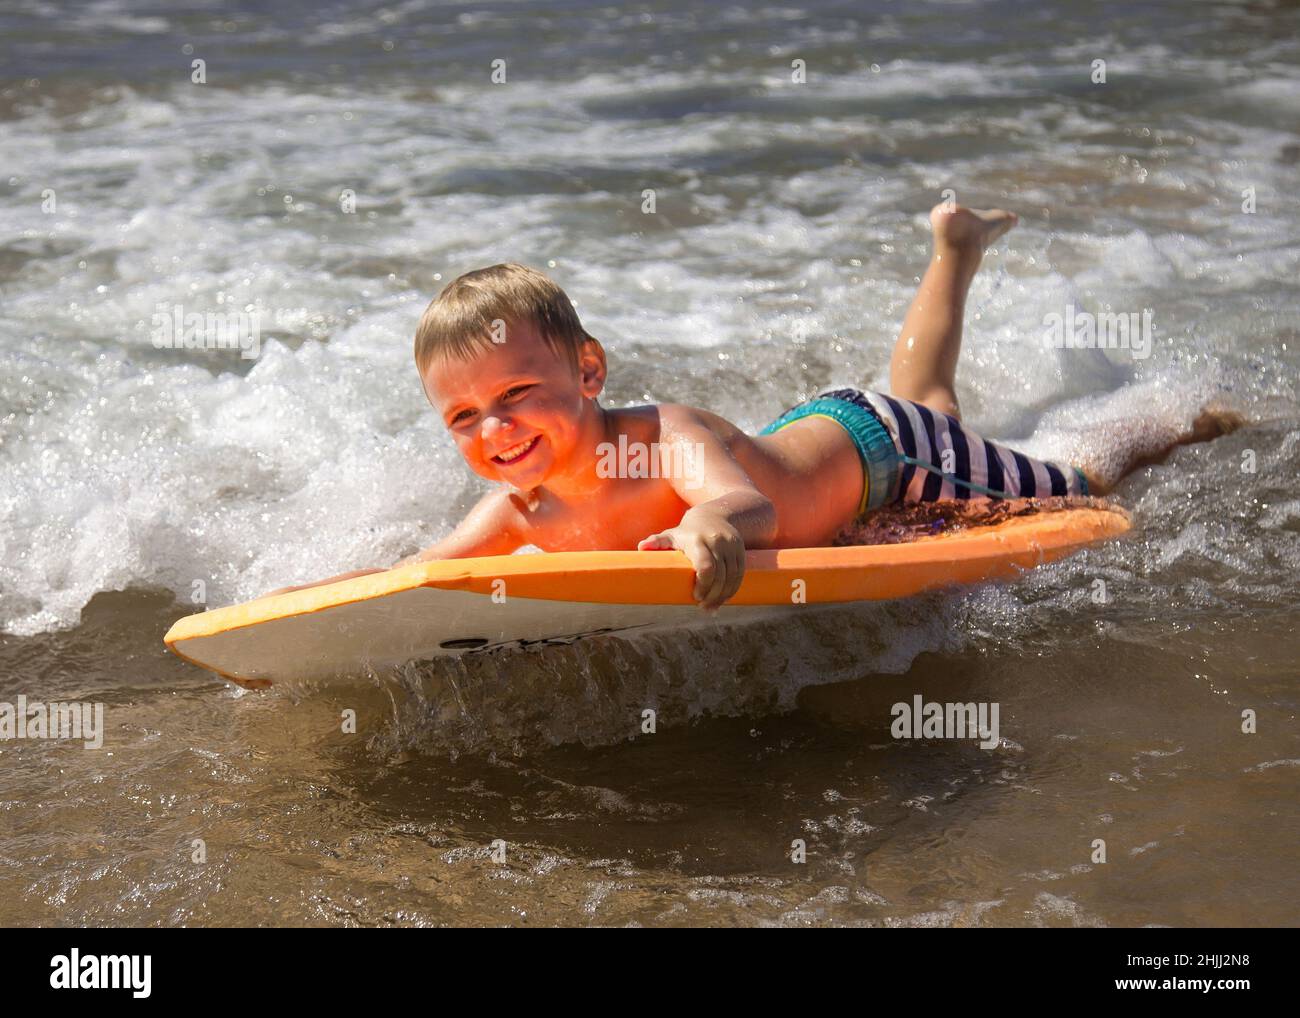 Young boy body boarding fearlessly in shallow waves. Stock Photo